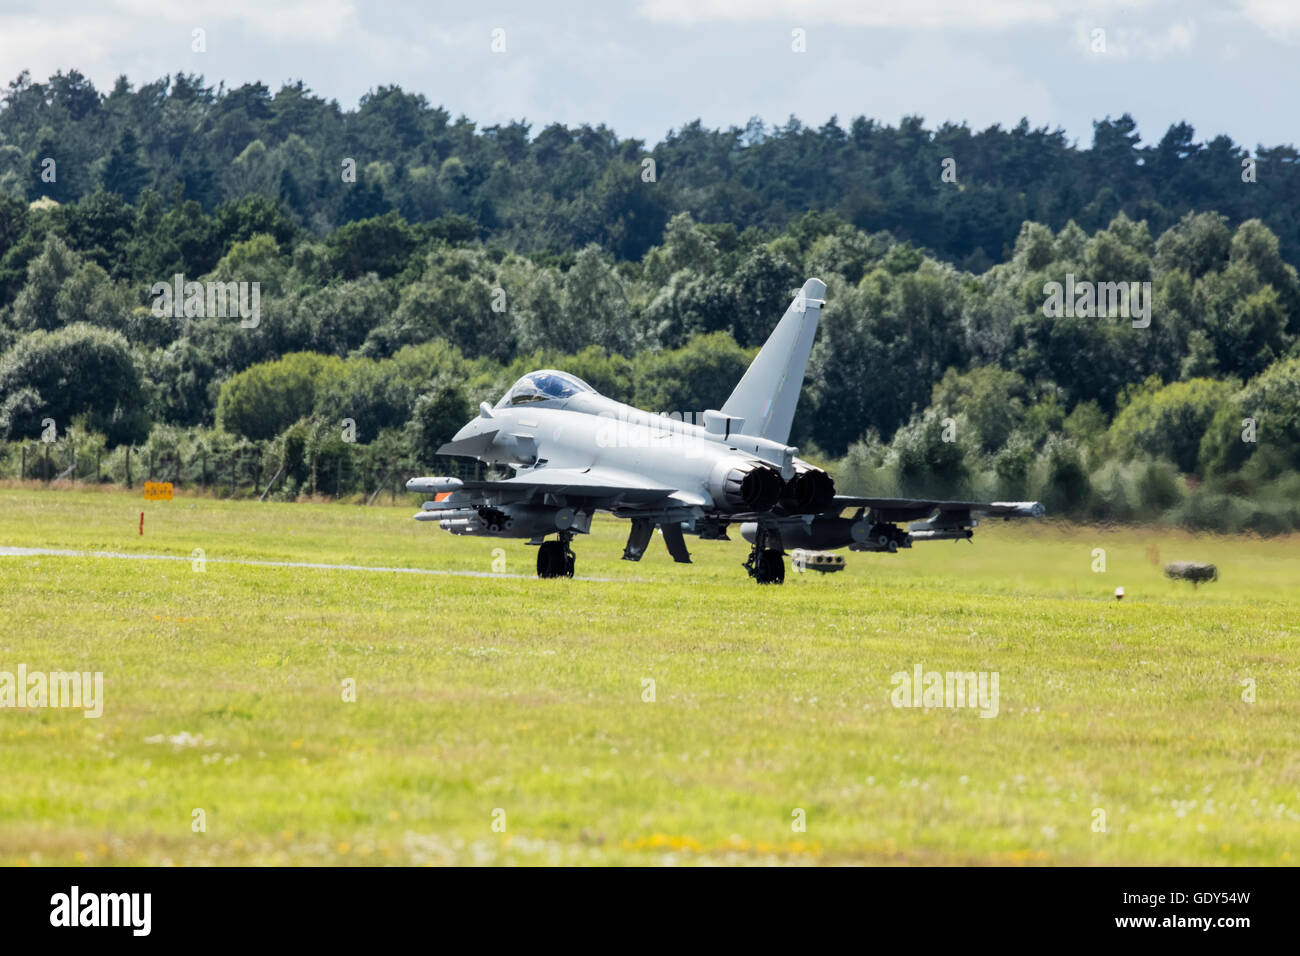 RAF Typhoon Eurofighter jet airplane on the runway at the Farnborough International Air Show in 2016 Stock Photo